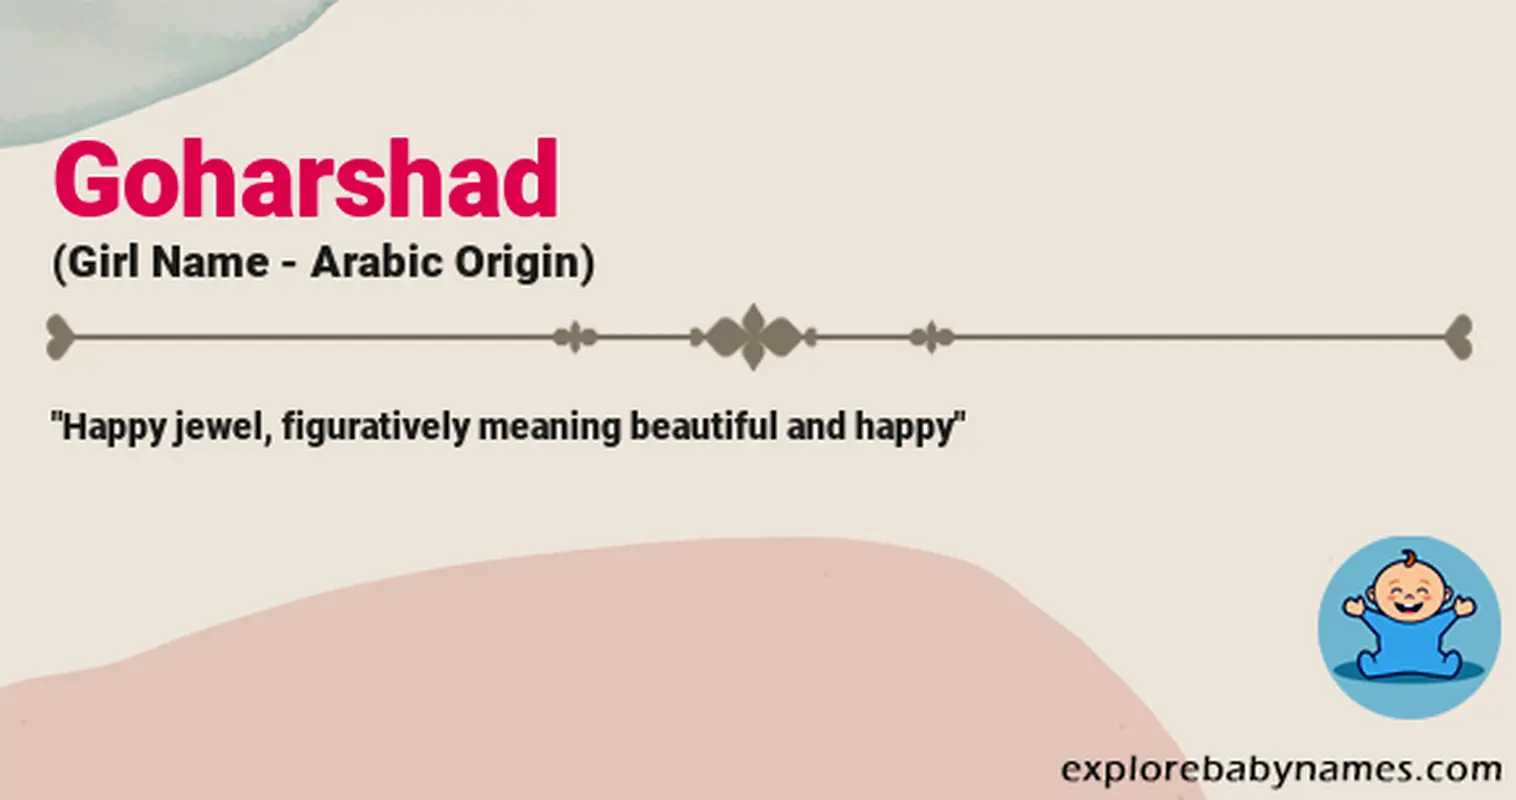 Meaning of Goharshad